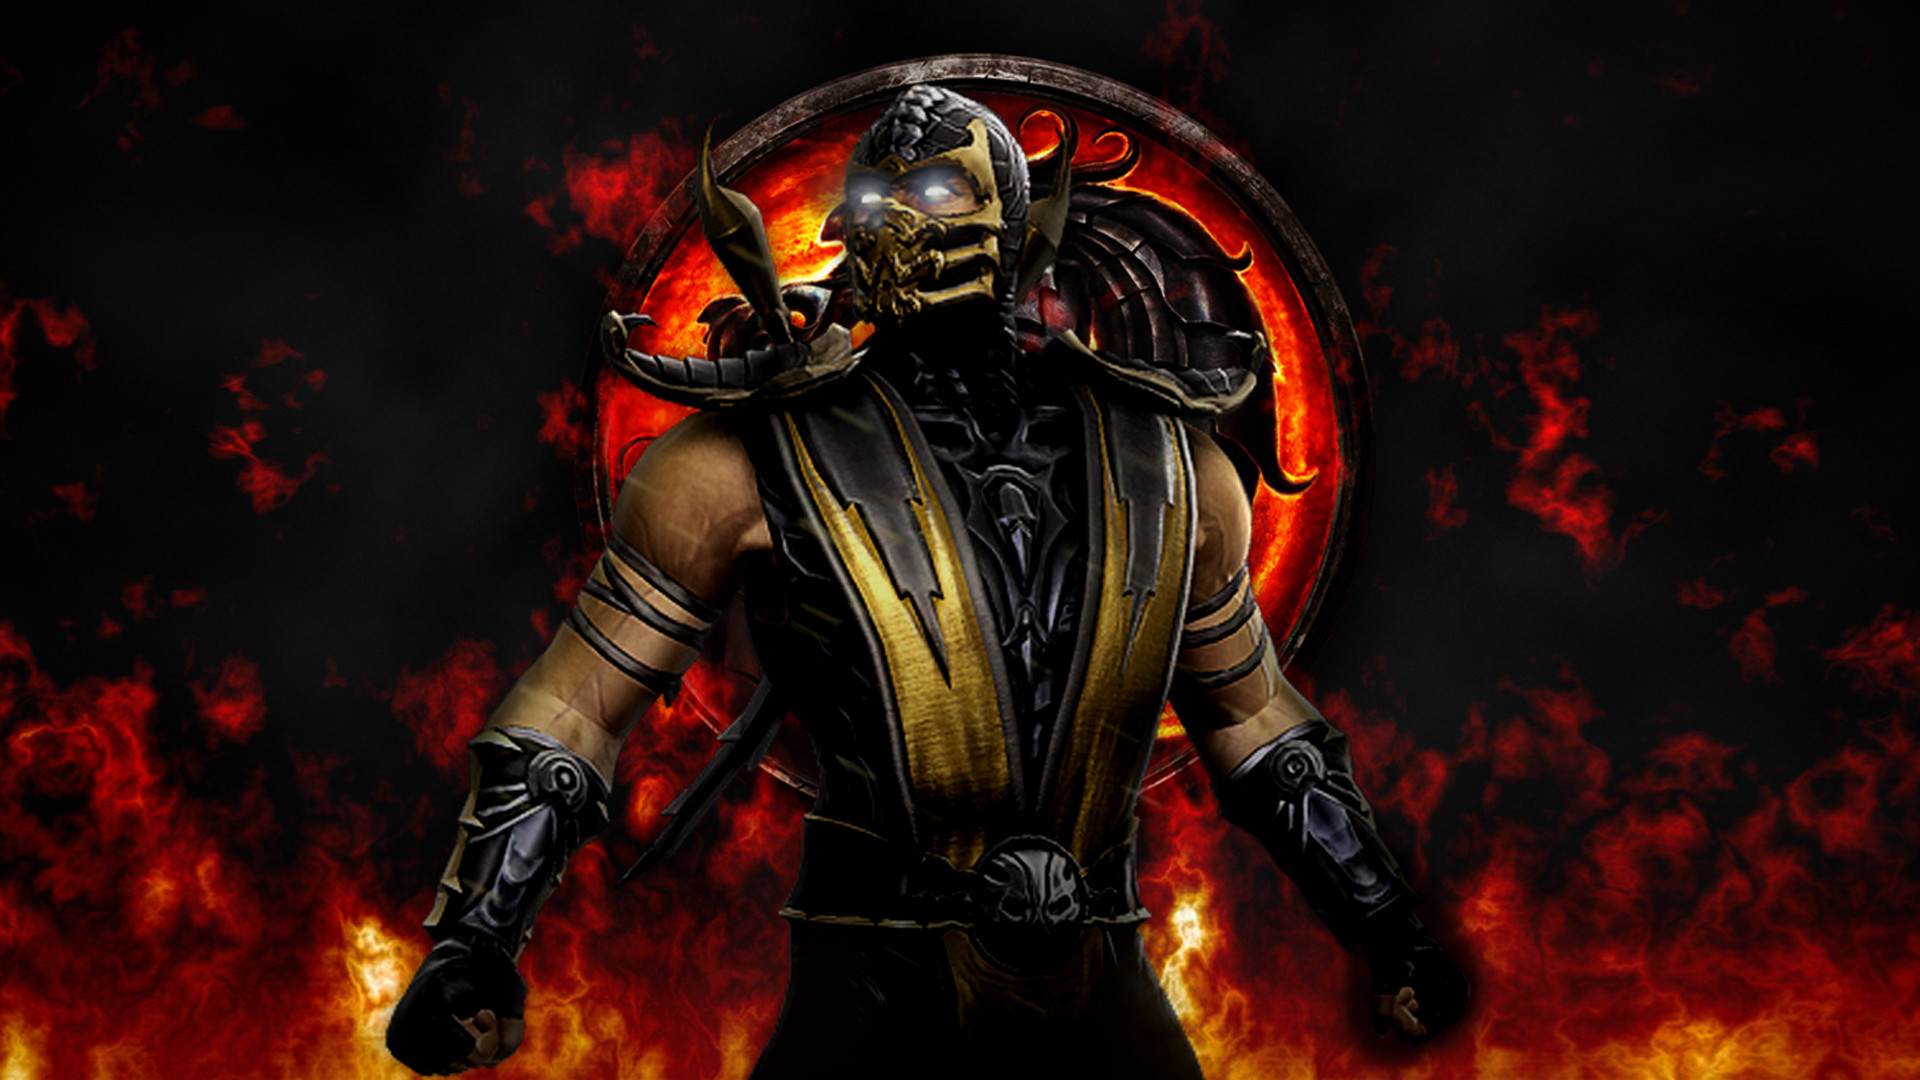 1920x1080 ... Images Of Scorpion From Mortal Kombat for Wallpaper